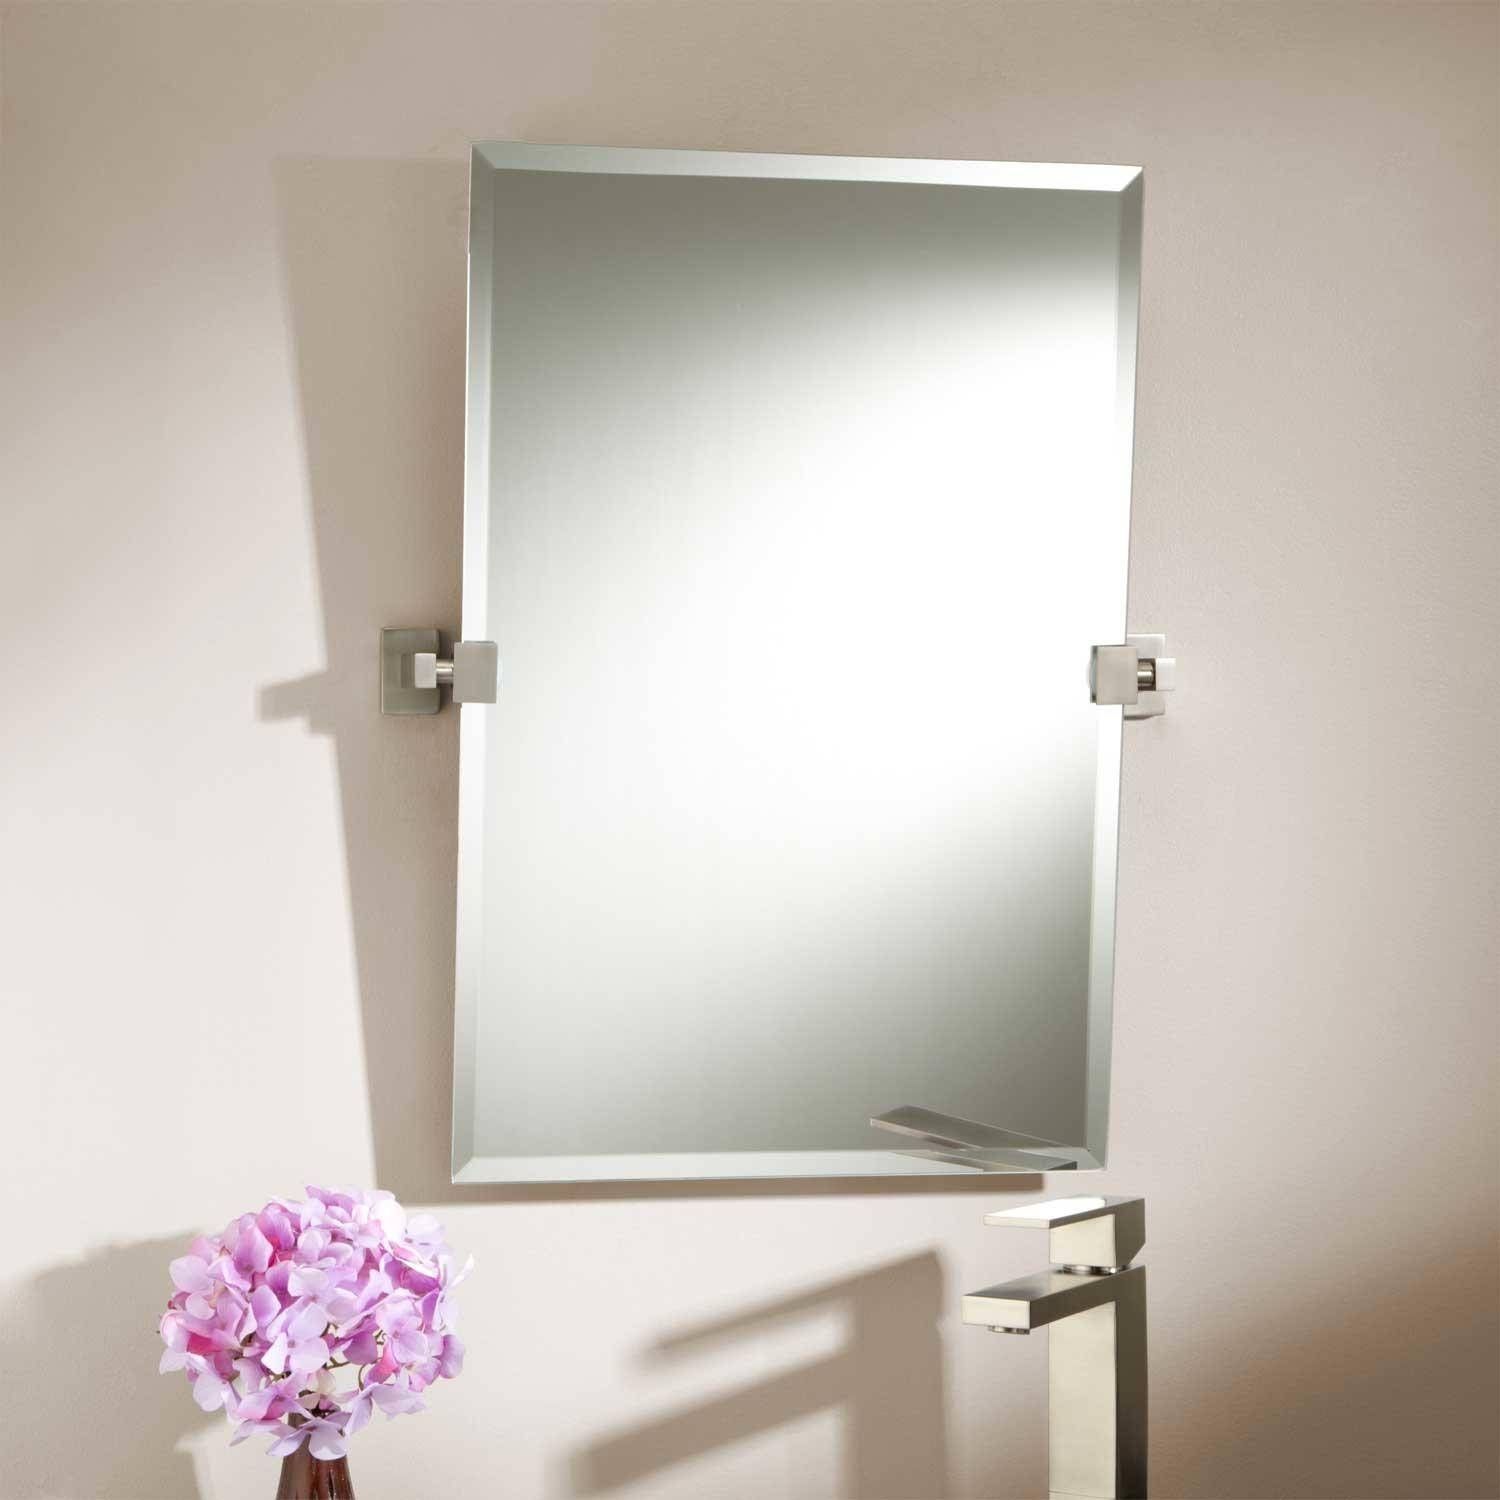 Frameless Bathroom Mirrors | Signature Hardware With Regard To Antique Frameless Mirrors (View 12 of 25)